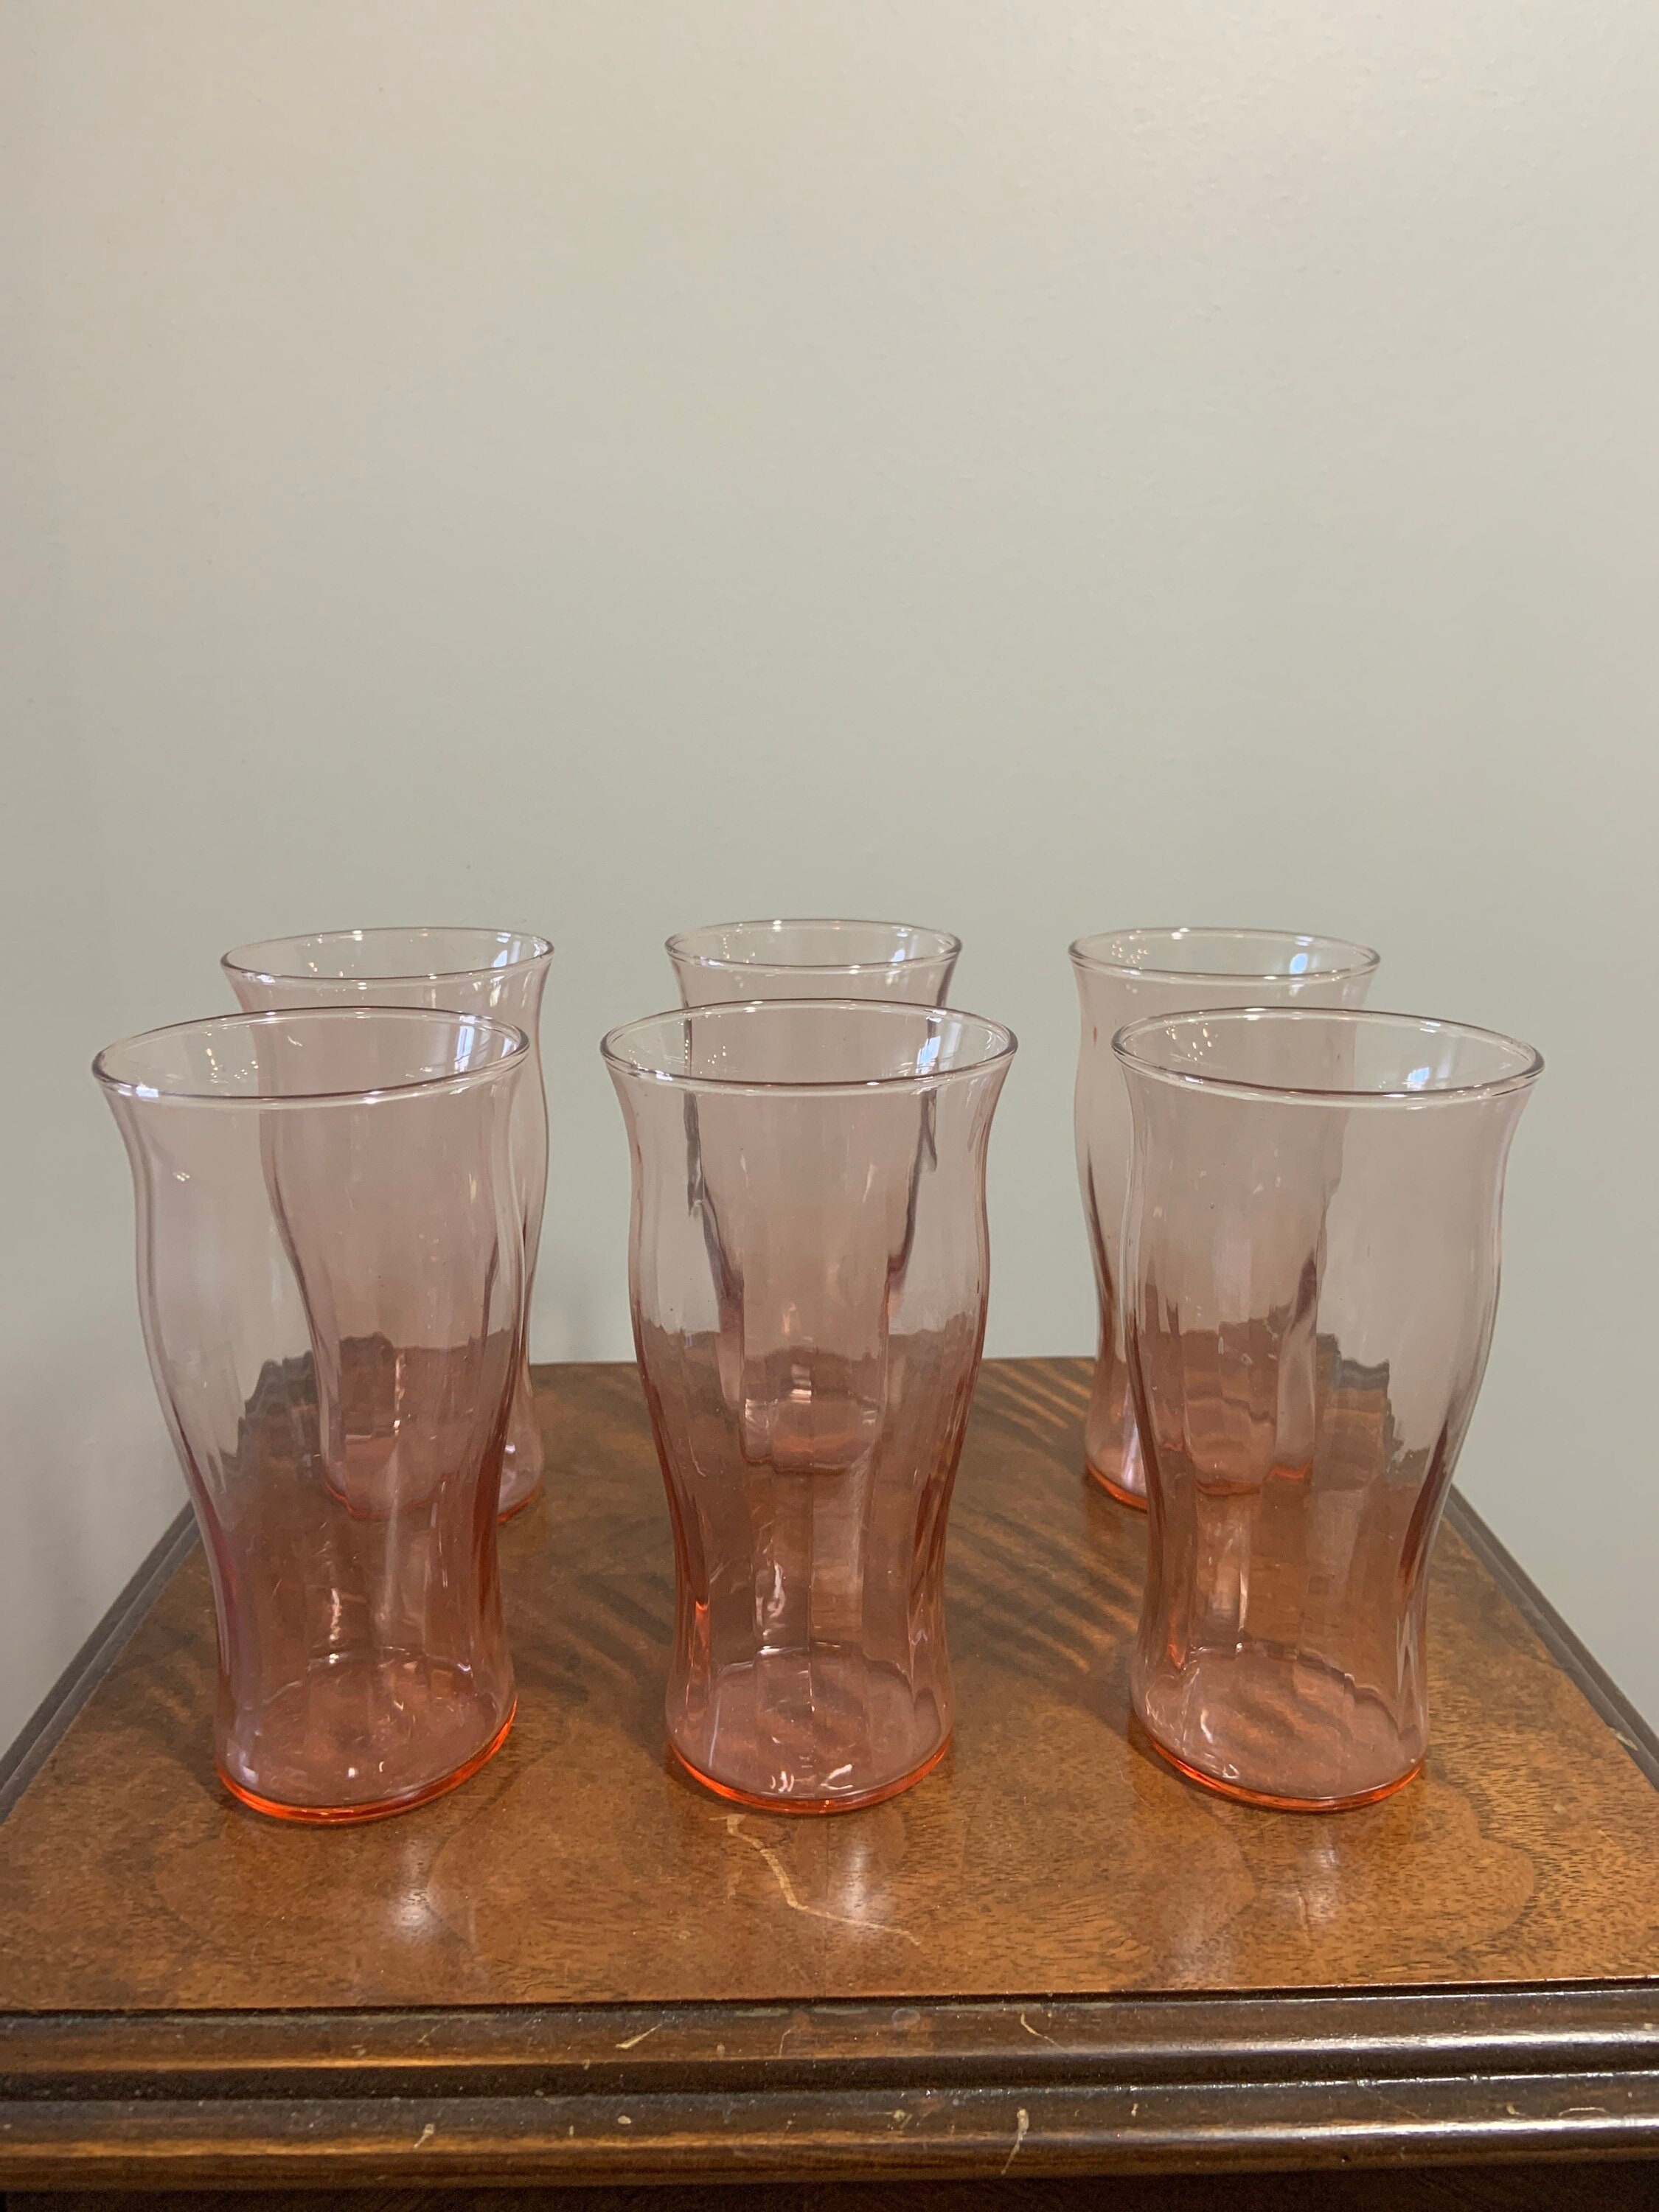 6 Pack Pink Vintage Glassware Set, 10oz Romantic Drinking Glasses, Colored  Water Glasses, Pink Embos…See more 6 Pack Pink Vintage Glassware Set, 10oz